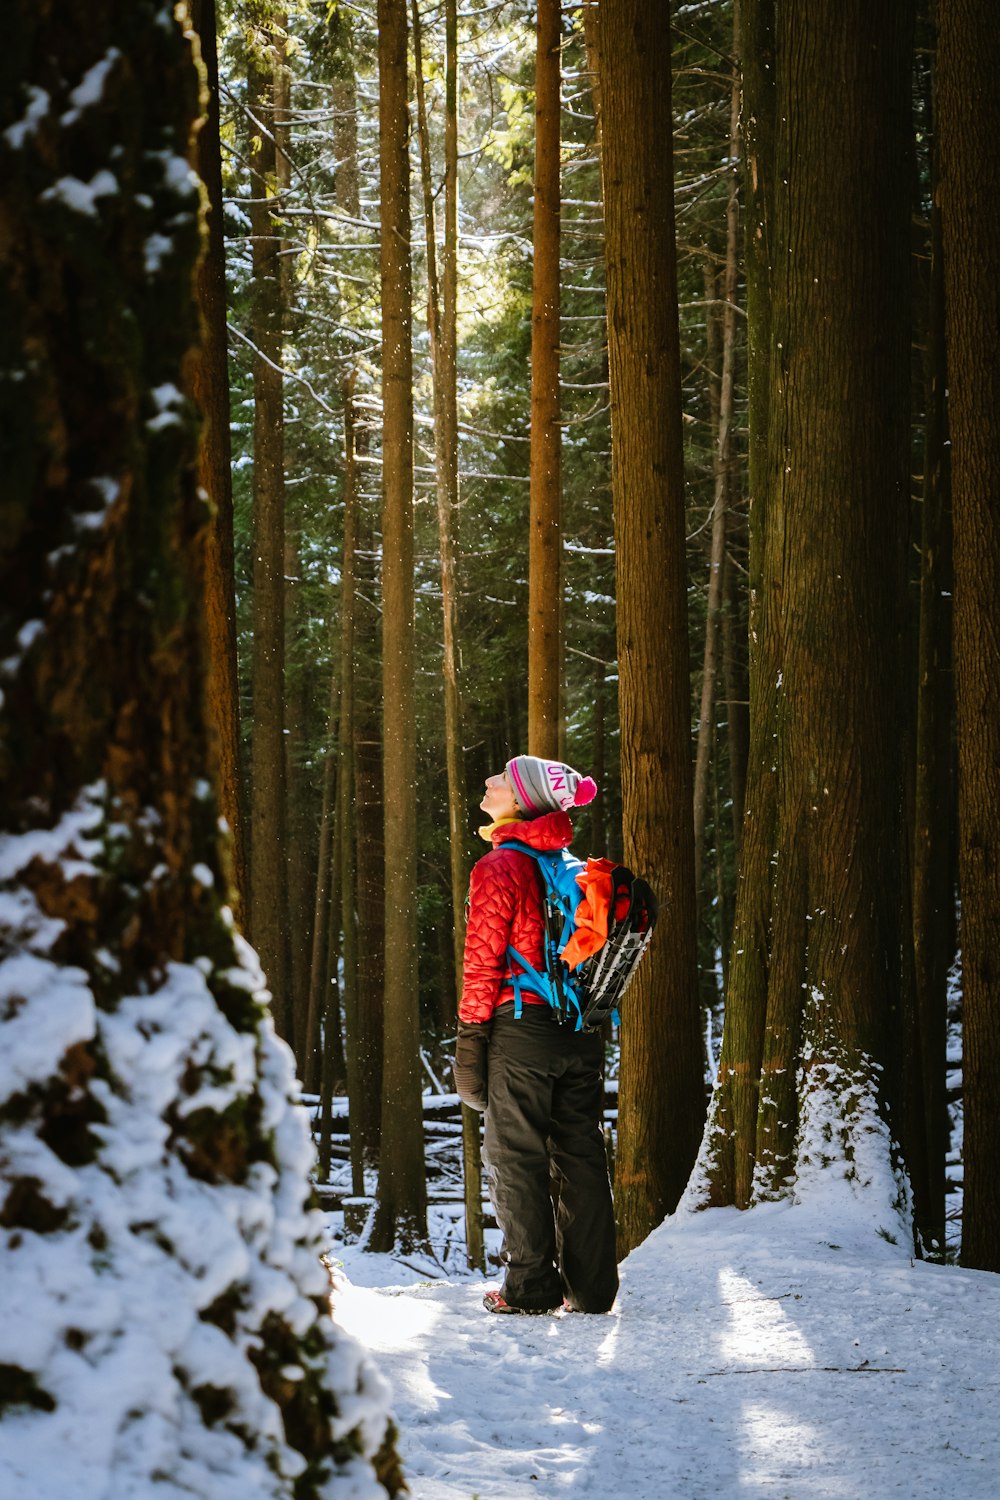 a person in a red jacket is walking through the woods